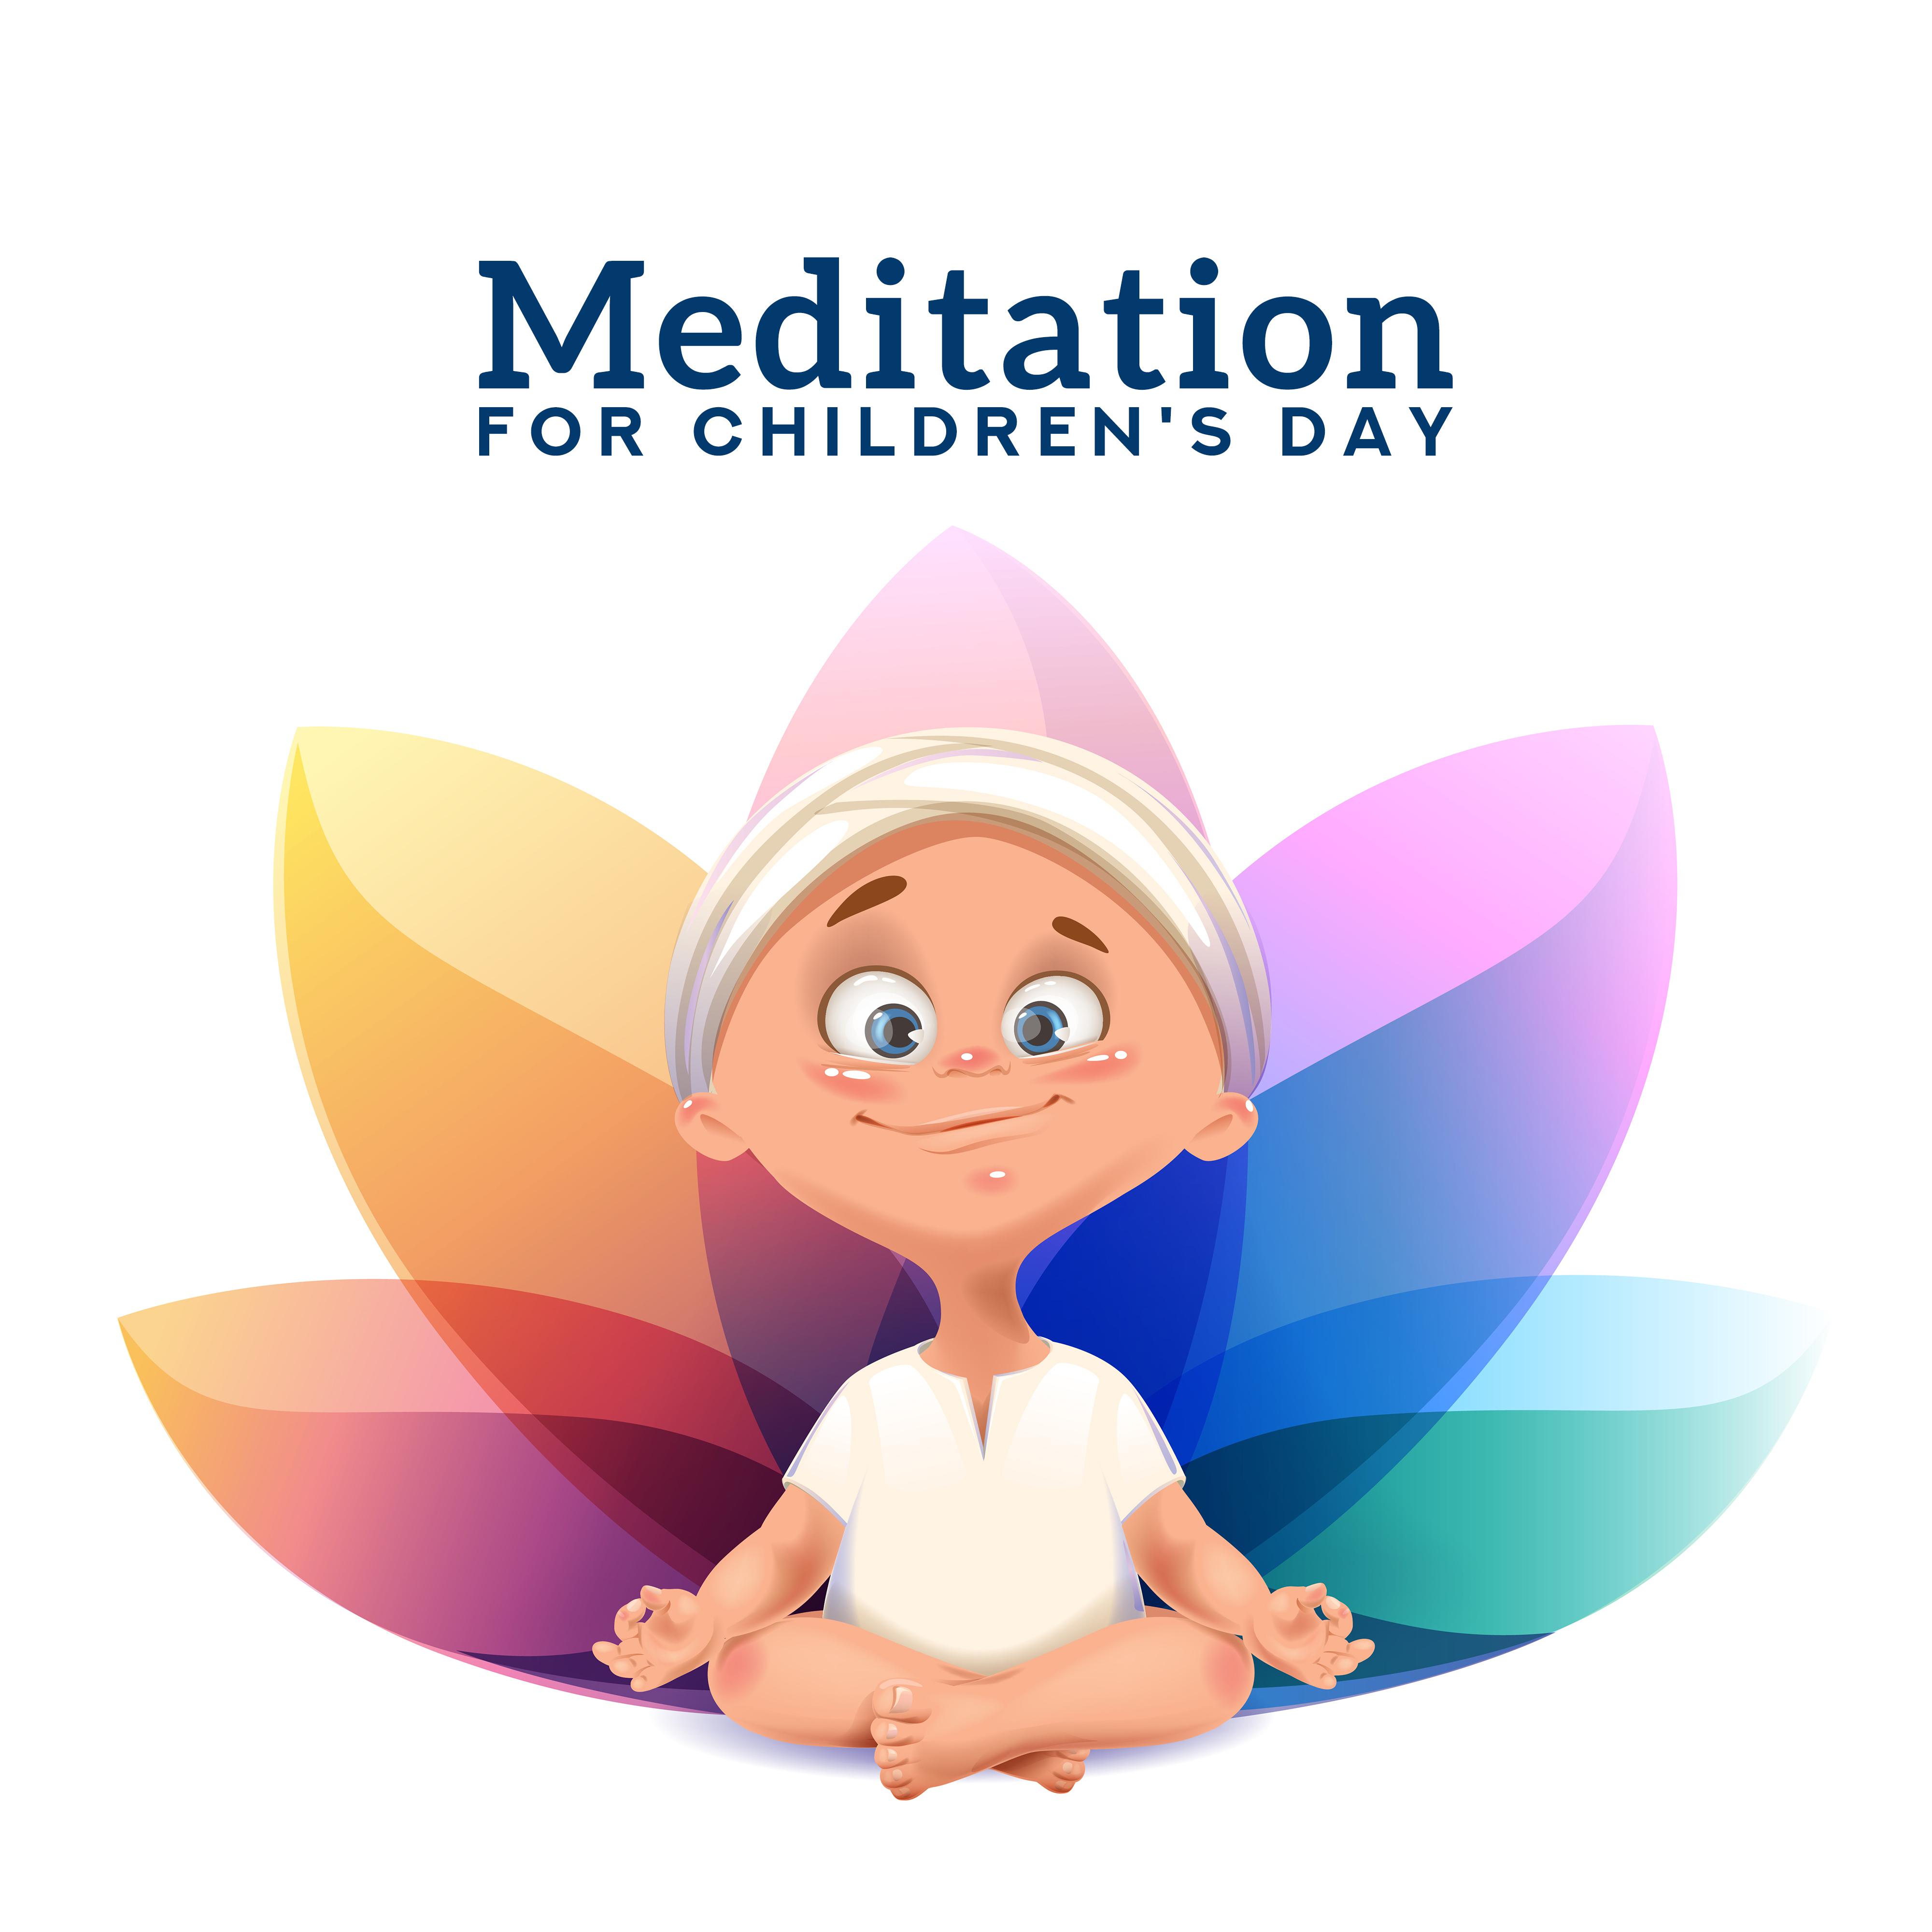 Meditation for Children's Day: Yoga for Kids, Pure Meditation, Happy Melodies, Zen, Music for Fun, Meditation Music Zone, Relaxed Baby, Lullabies for Deep Meditation